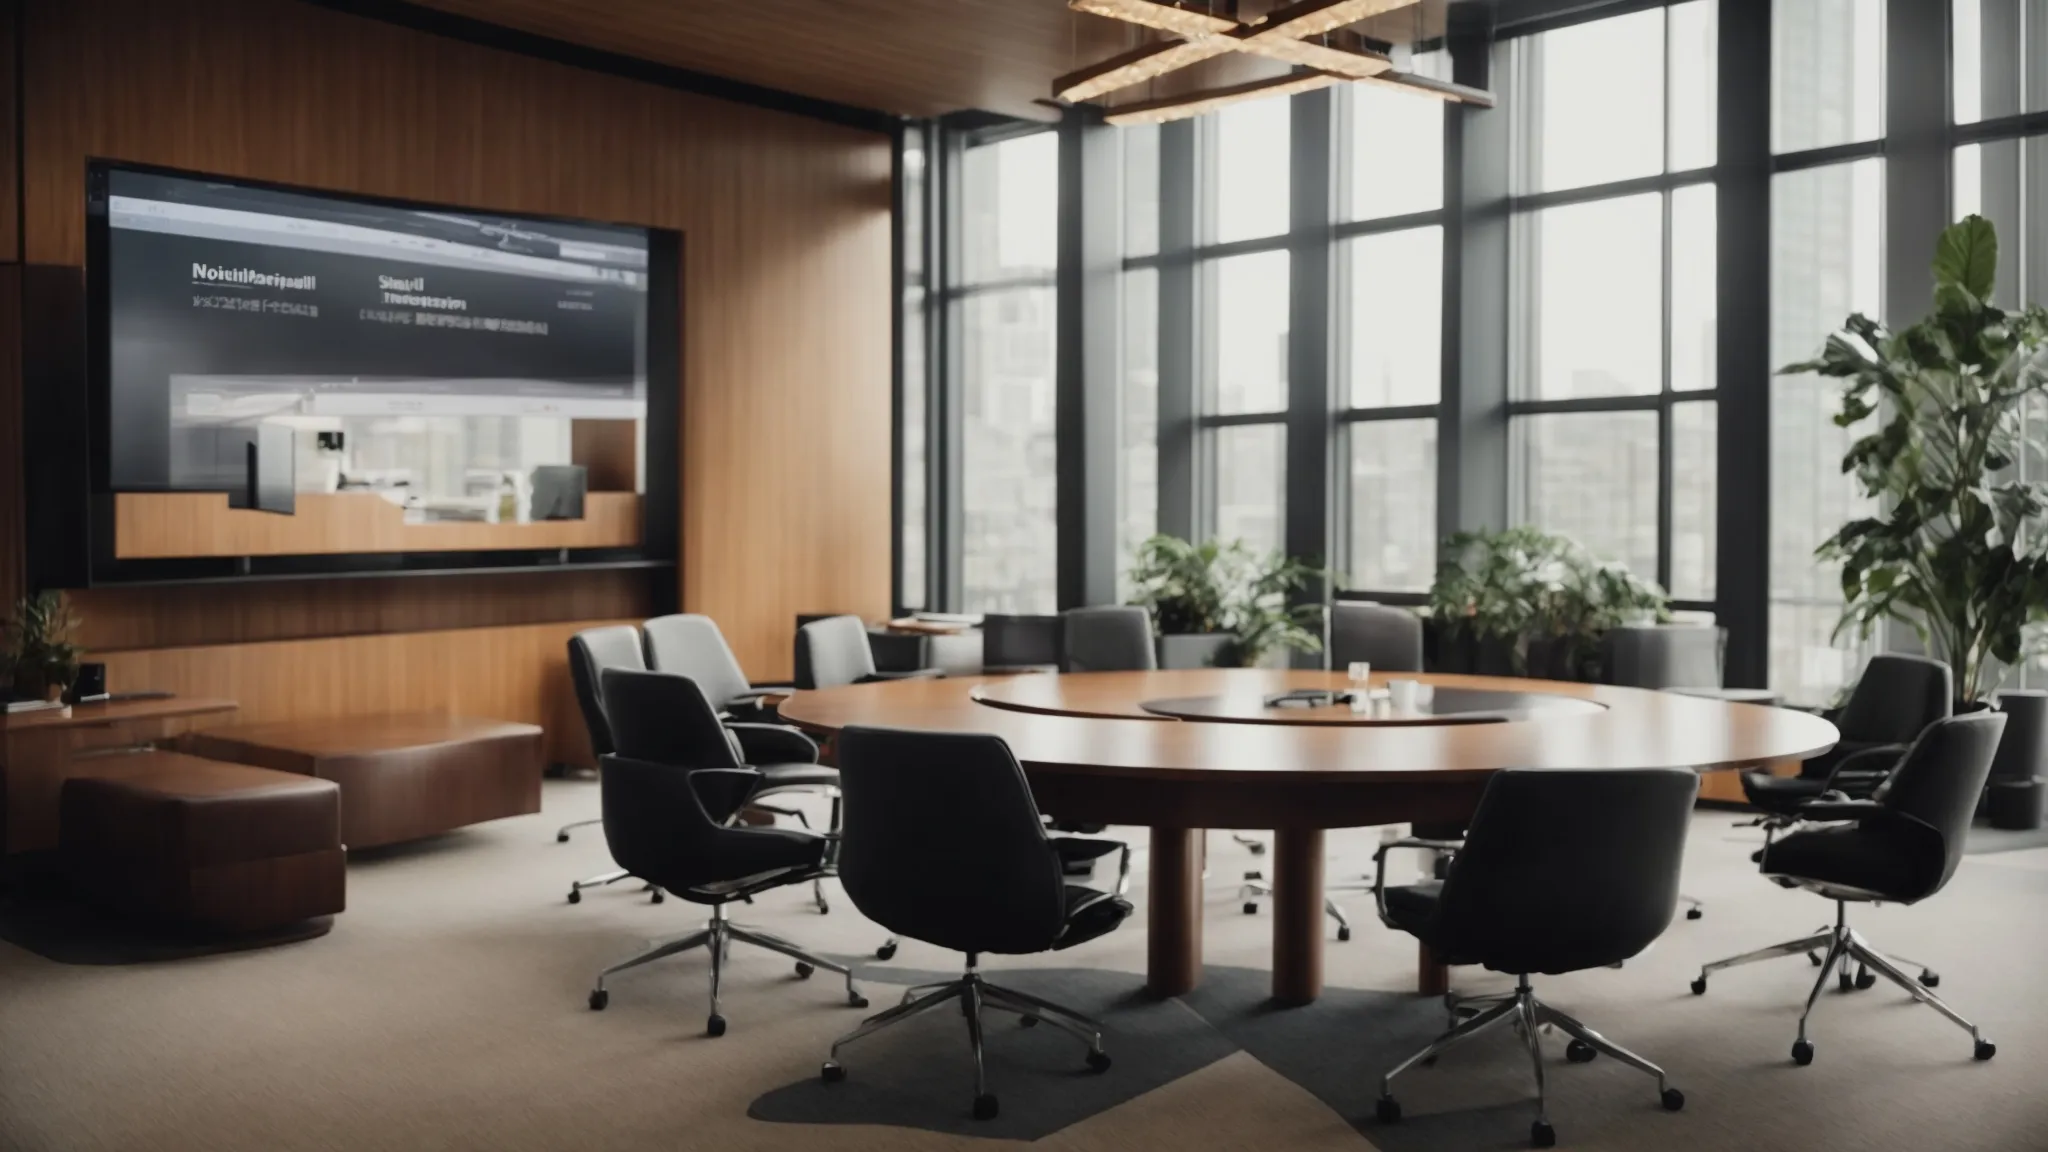 a corporate meeting room where employees are engaging in a wellness program presentation without any visible personal data.